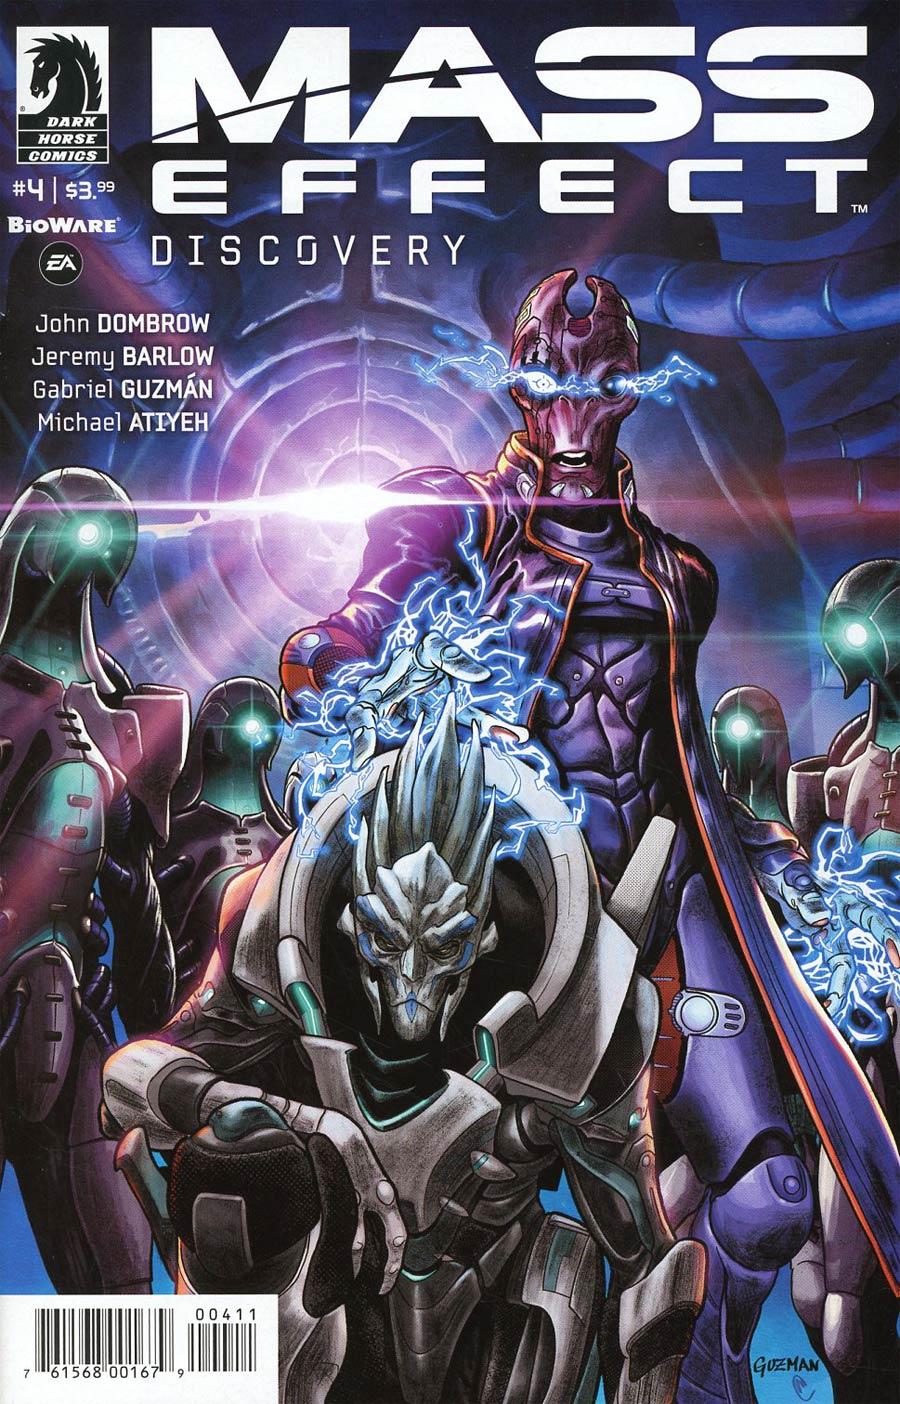 Mass Effect Discovery Vol. 1 #4